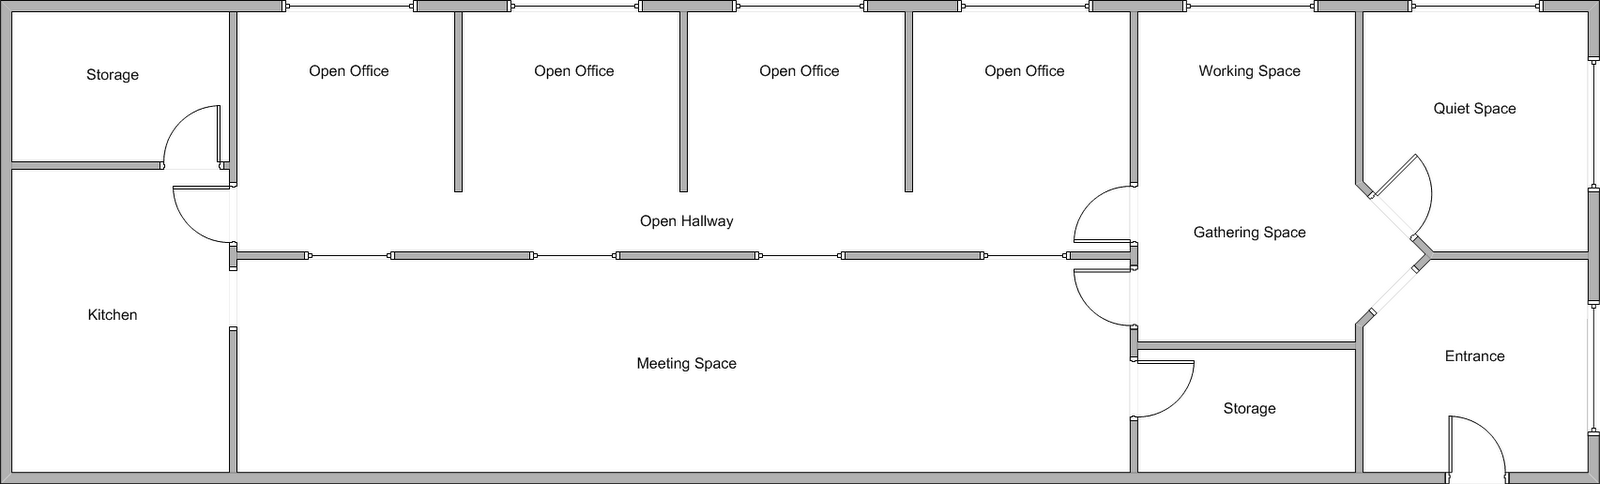 [New+Commons+Work+Space.png]